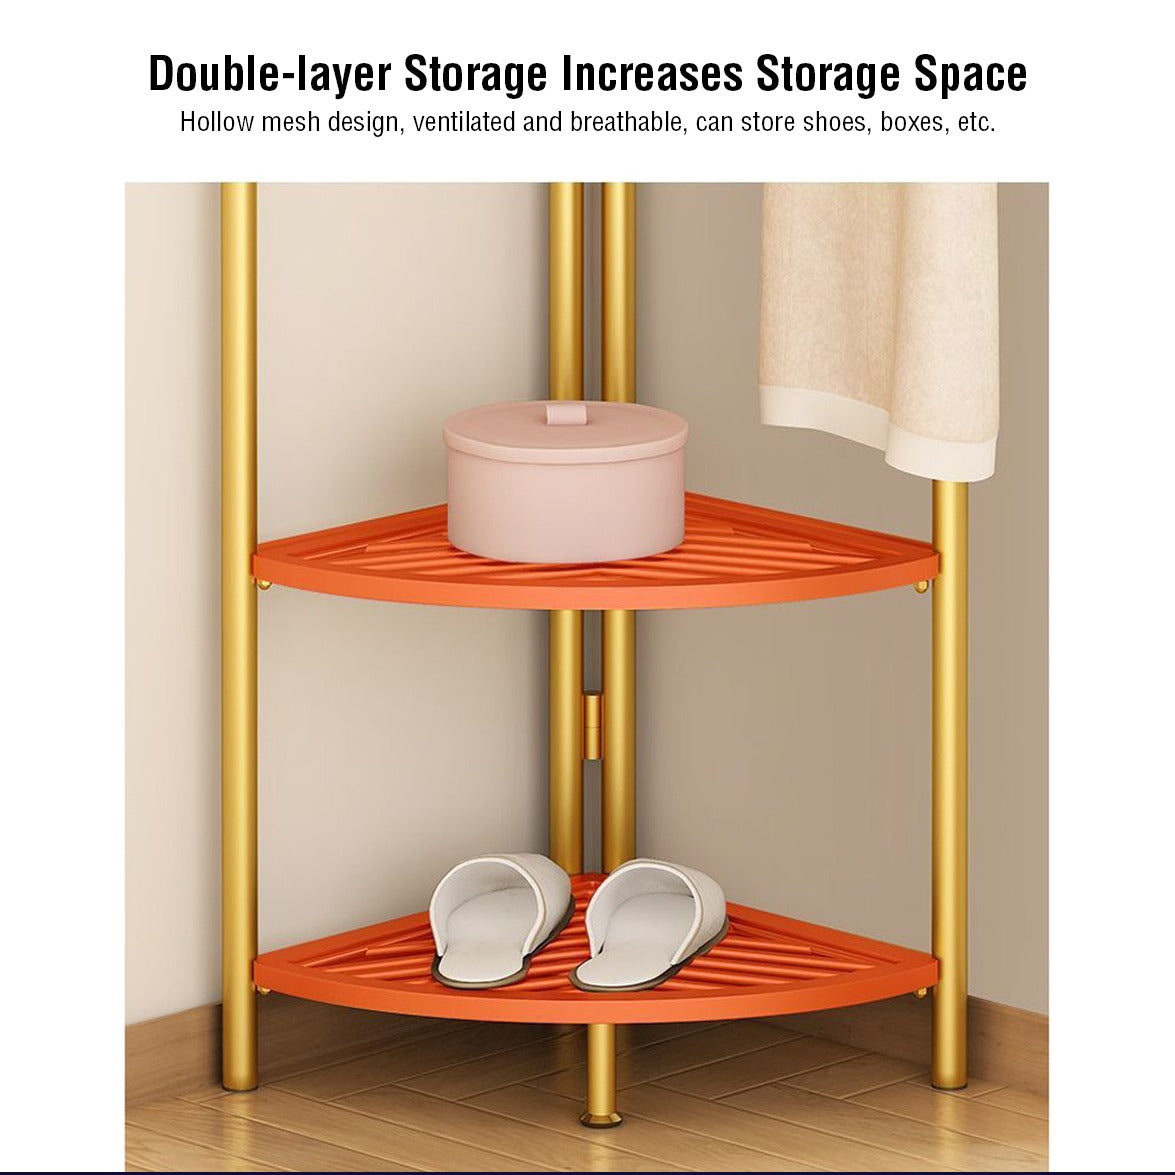 Double layer storage increases storage space. Hollow mesh design, ventilated and breathable, can store boxes, shoes, etc.